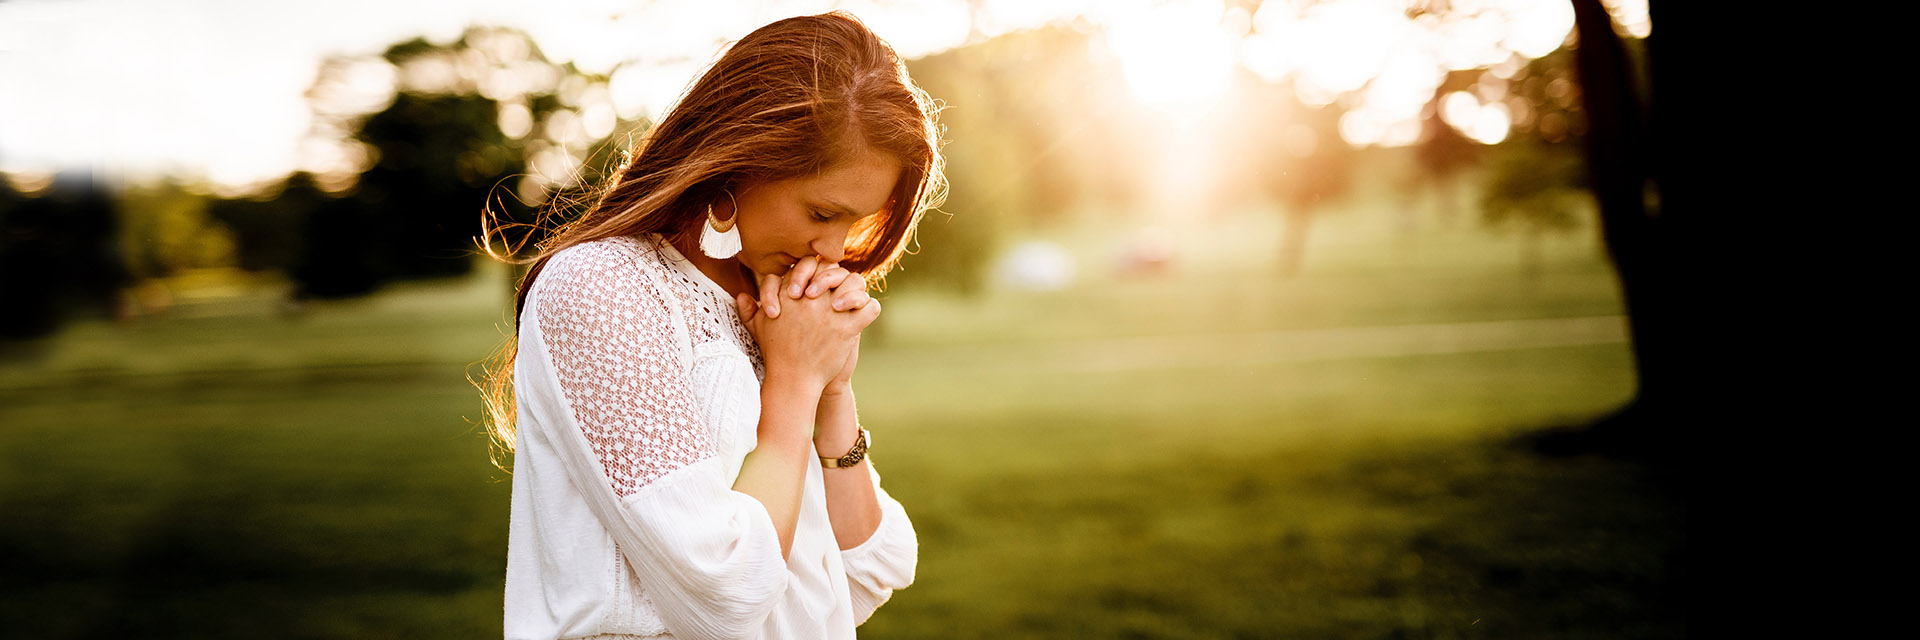 Woman Clasping Hands and Praying Outdoors